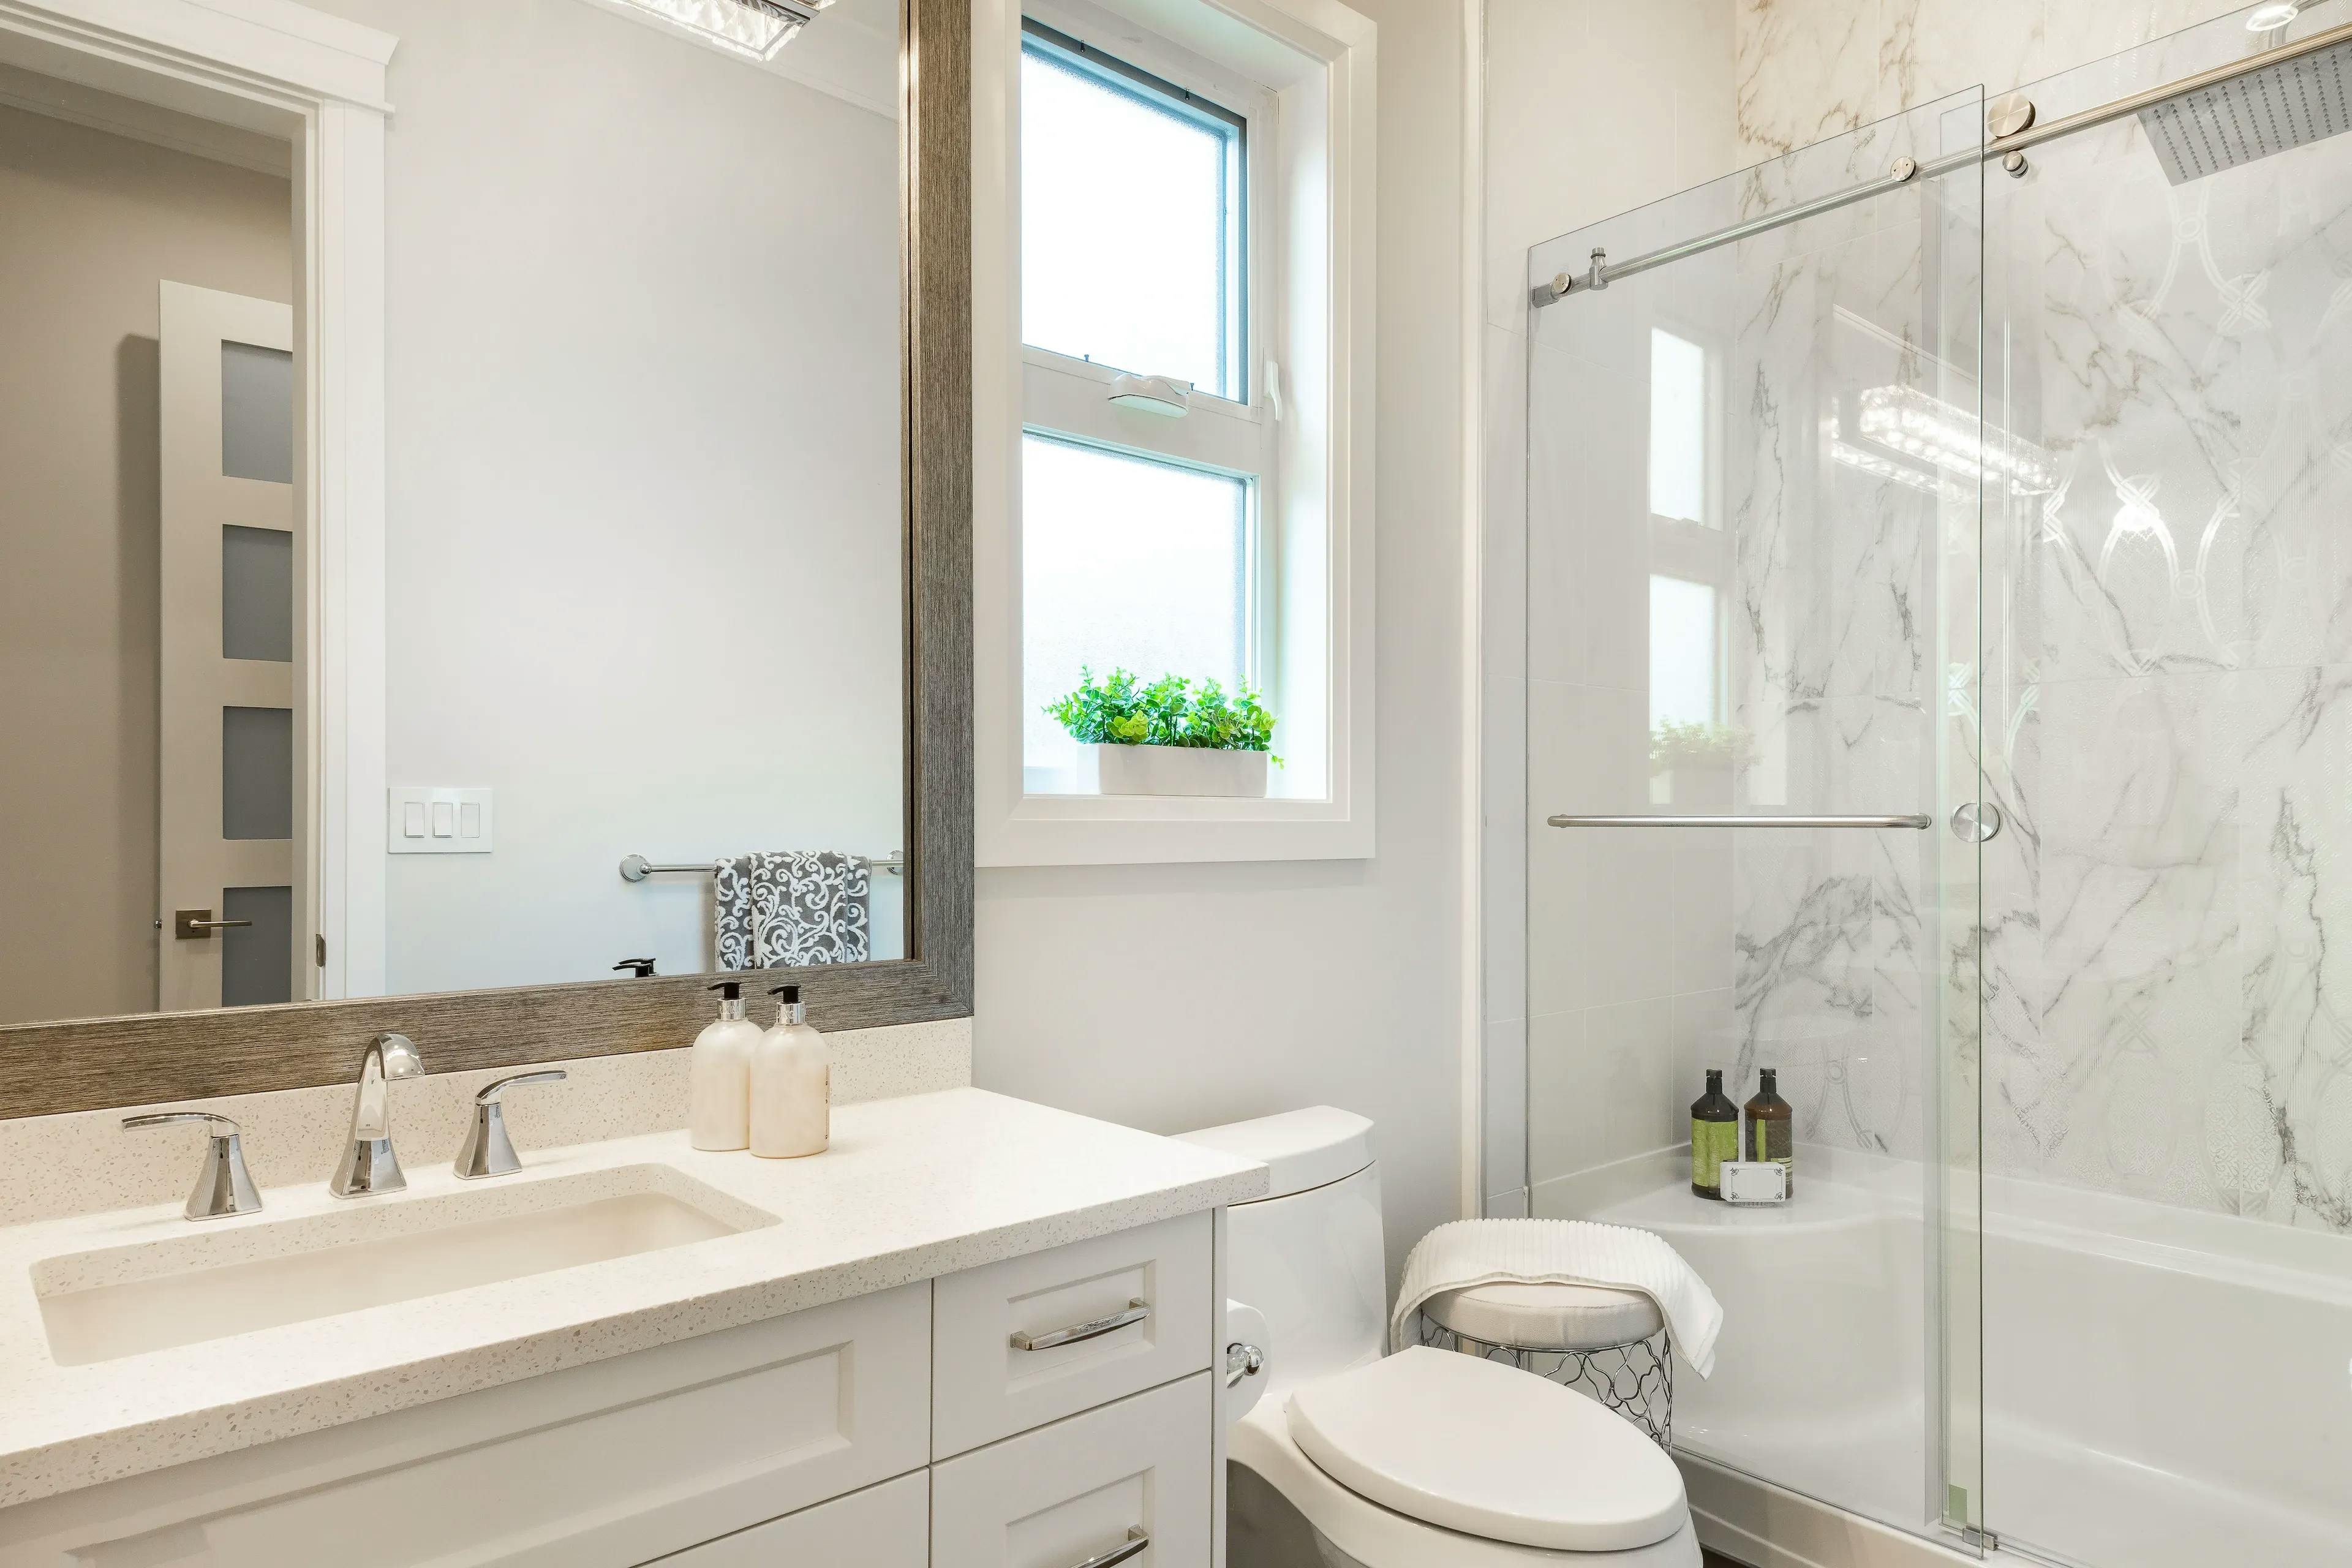 Bathroom setting with a vanity, mirror, sink, toilet seat, and sliding glass doors for the bathtub